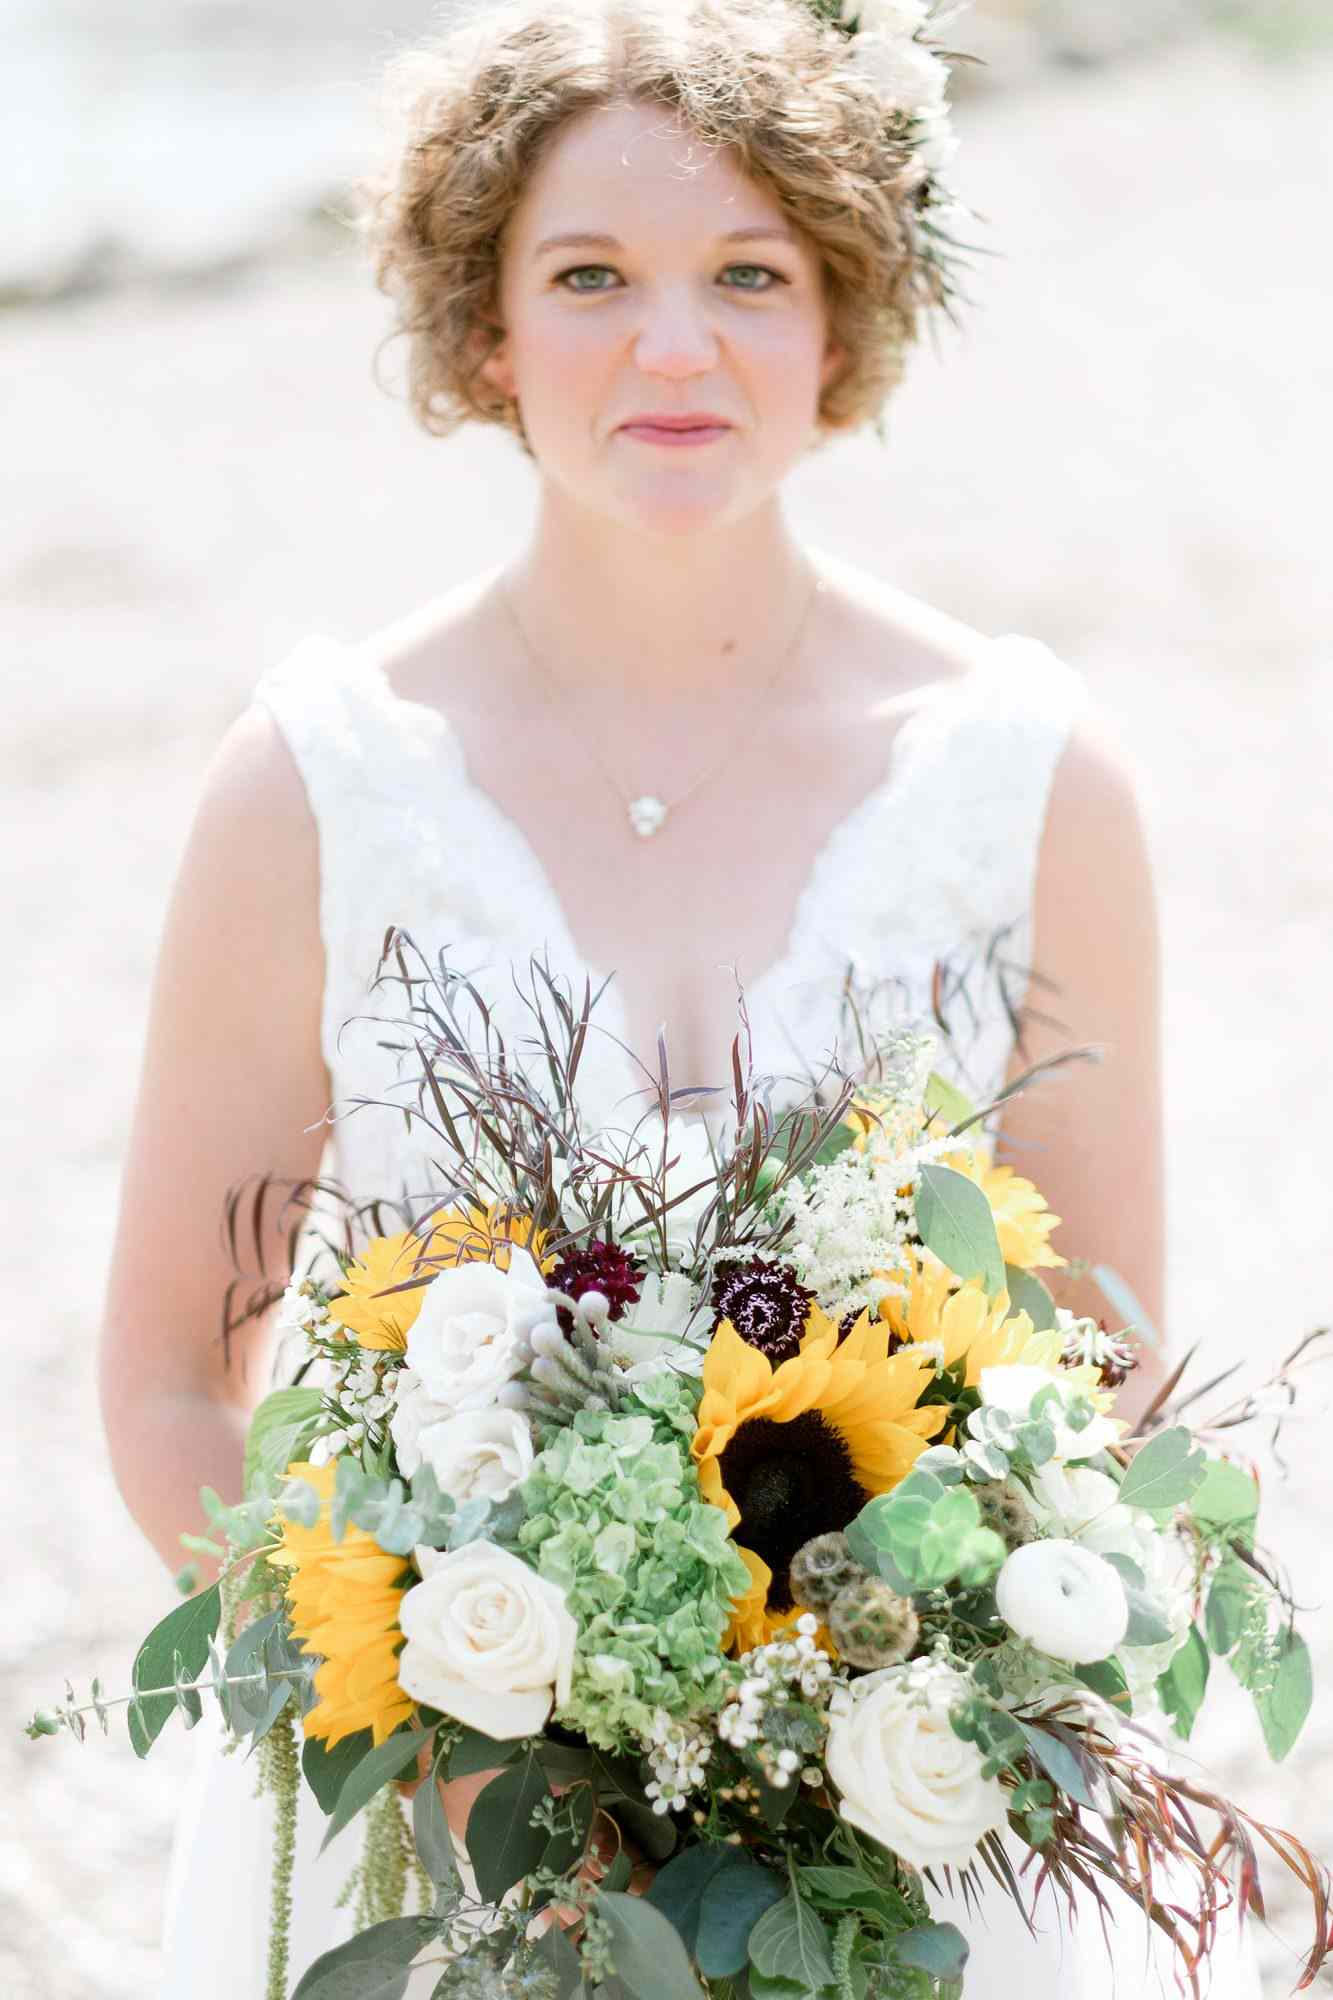 Wedding flowers bridal bouquet decorations sunflowers 8 Bouquets and mores 